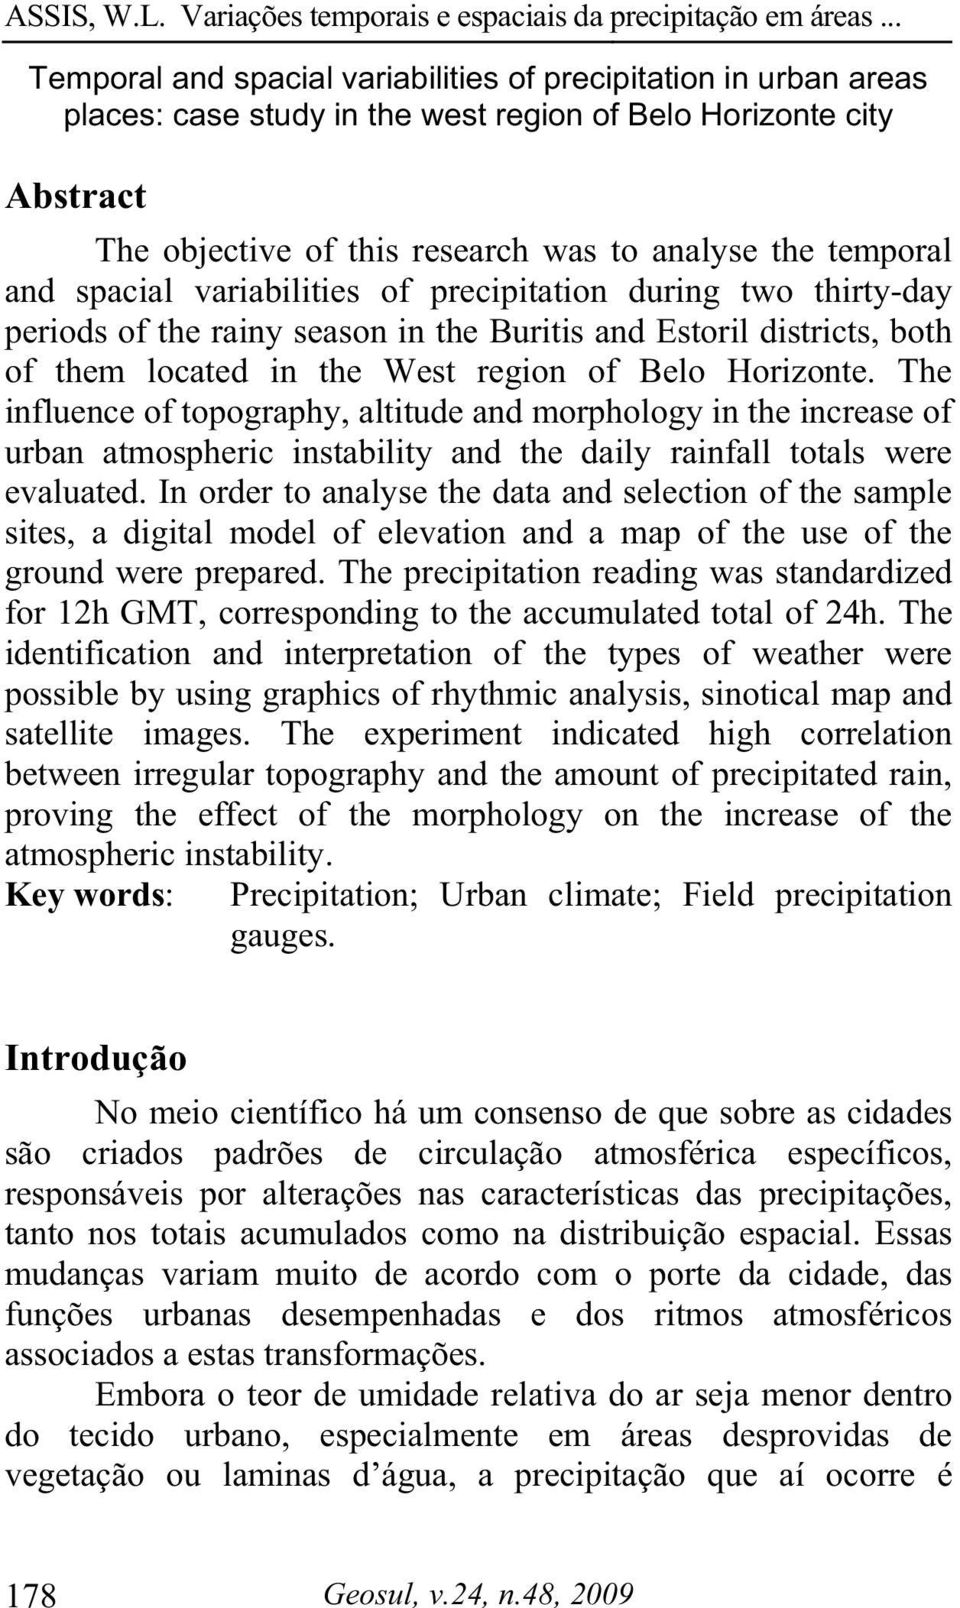 The influence of topography, altitude and morphology in the increase of urban atmospheric instability and the daily rainfall totals were evaluated.